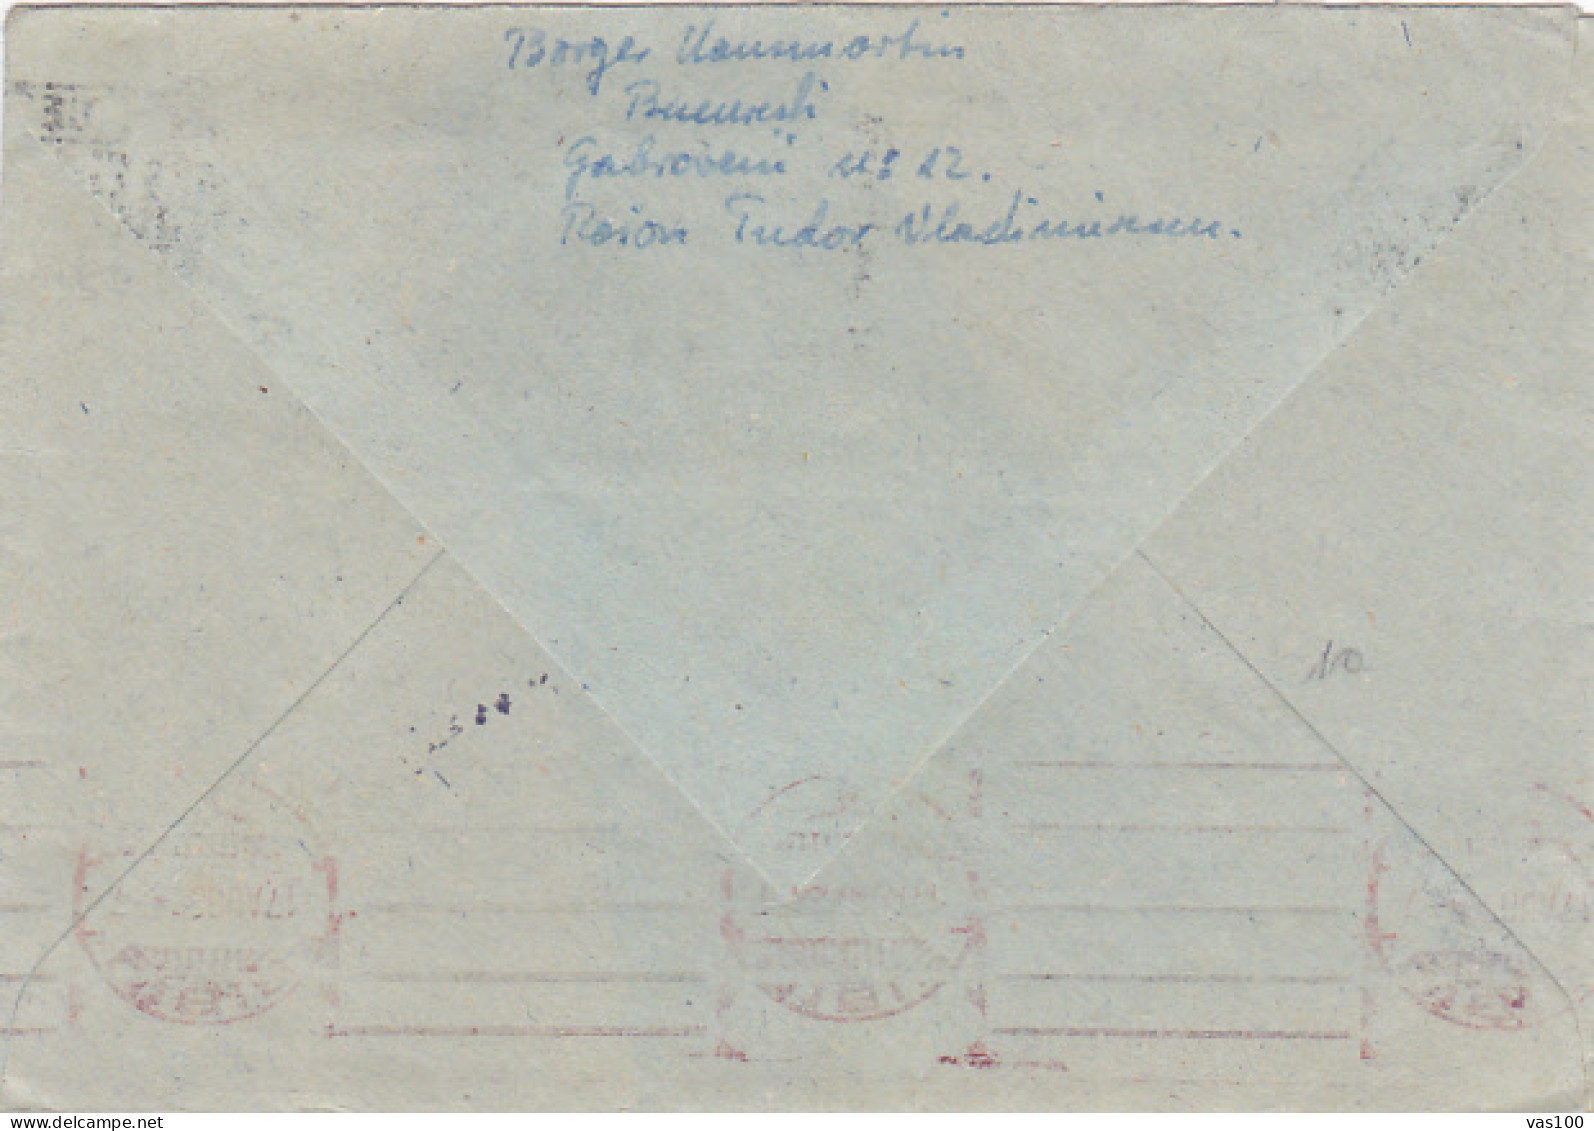 POSTAL SERTVICES SPECIAL POSTMARKS, REPUBLIC COAT OF ARMS STAMP ON COVER WITH LETTER, 1952, ROMANIA - Briefe U. Dokumente